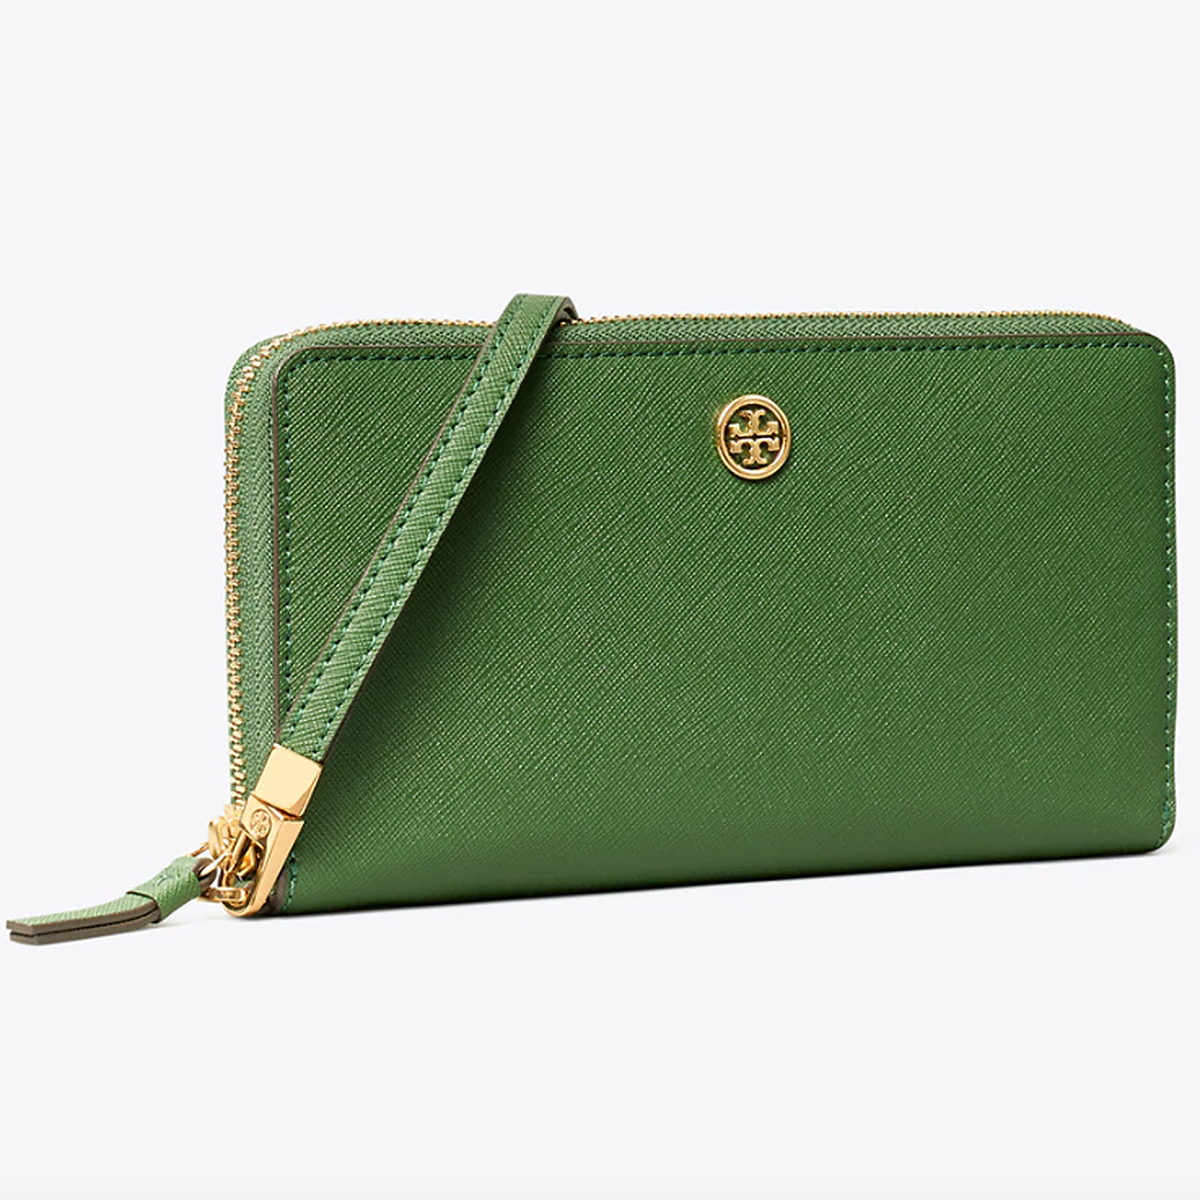 Tory Burch Bags: 15 Picks From the Semi-Annual Sale Up to 62% Off | Us ...